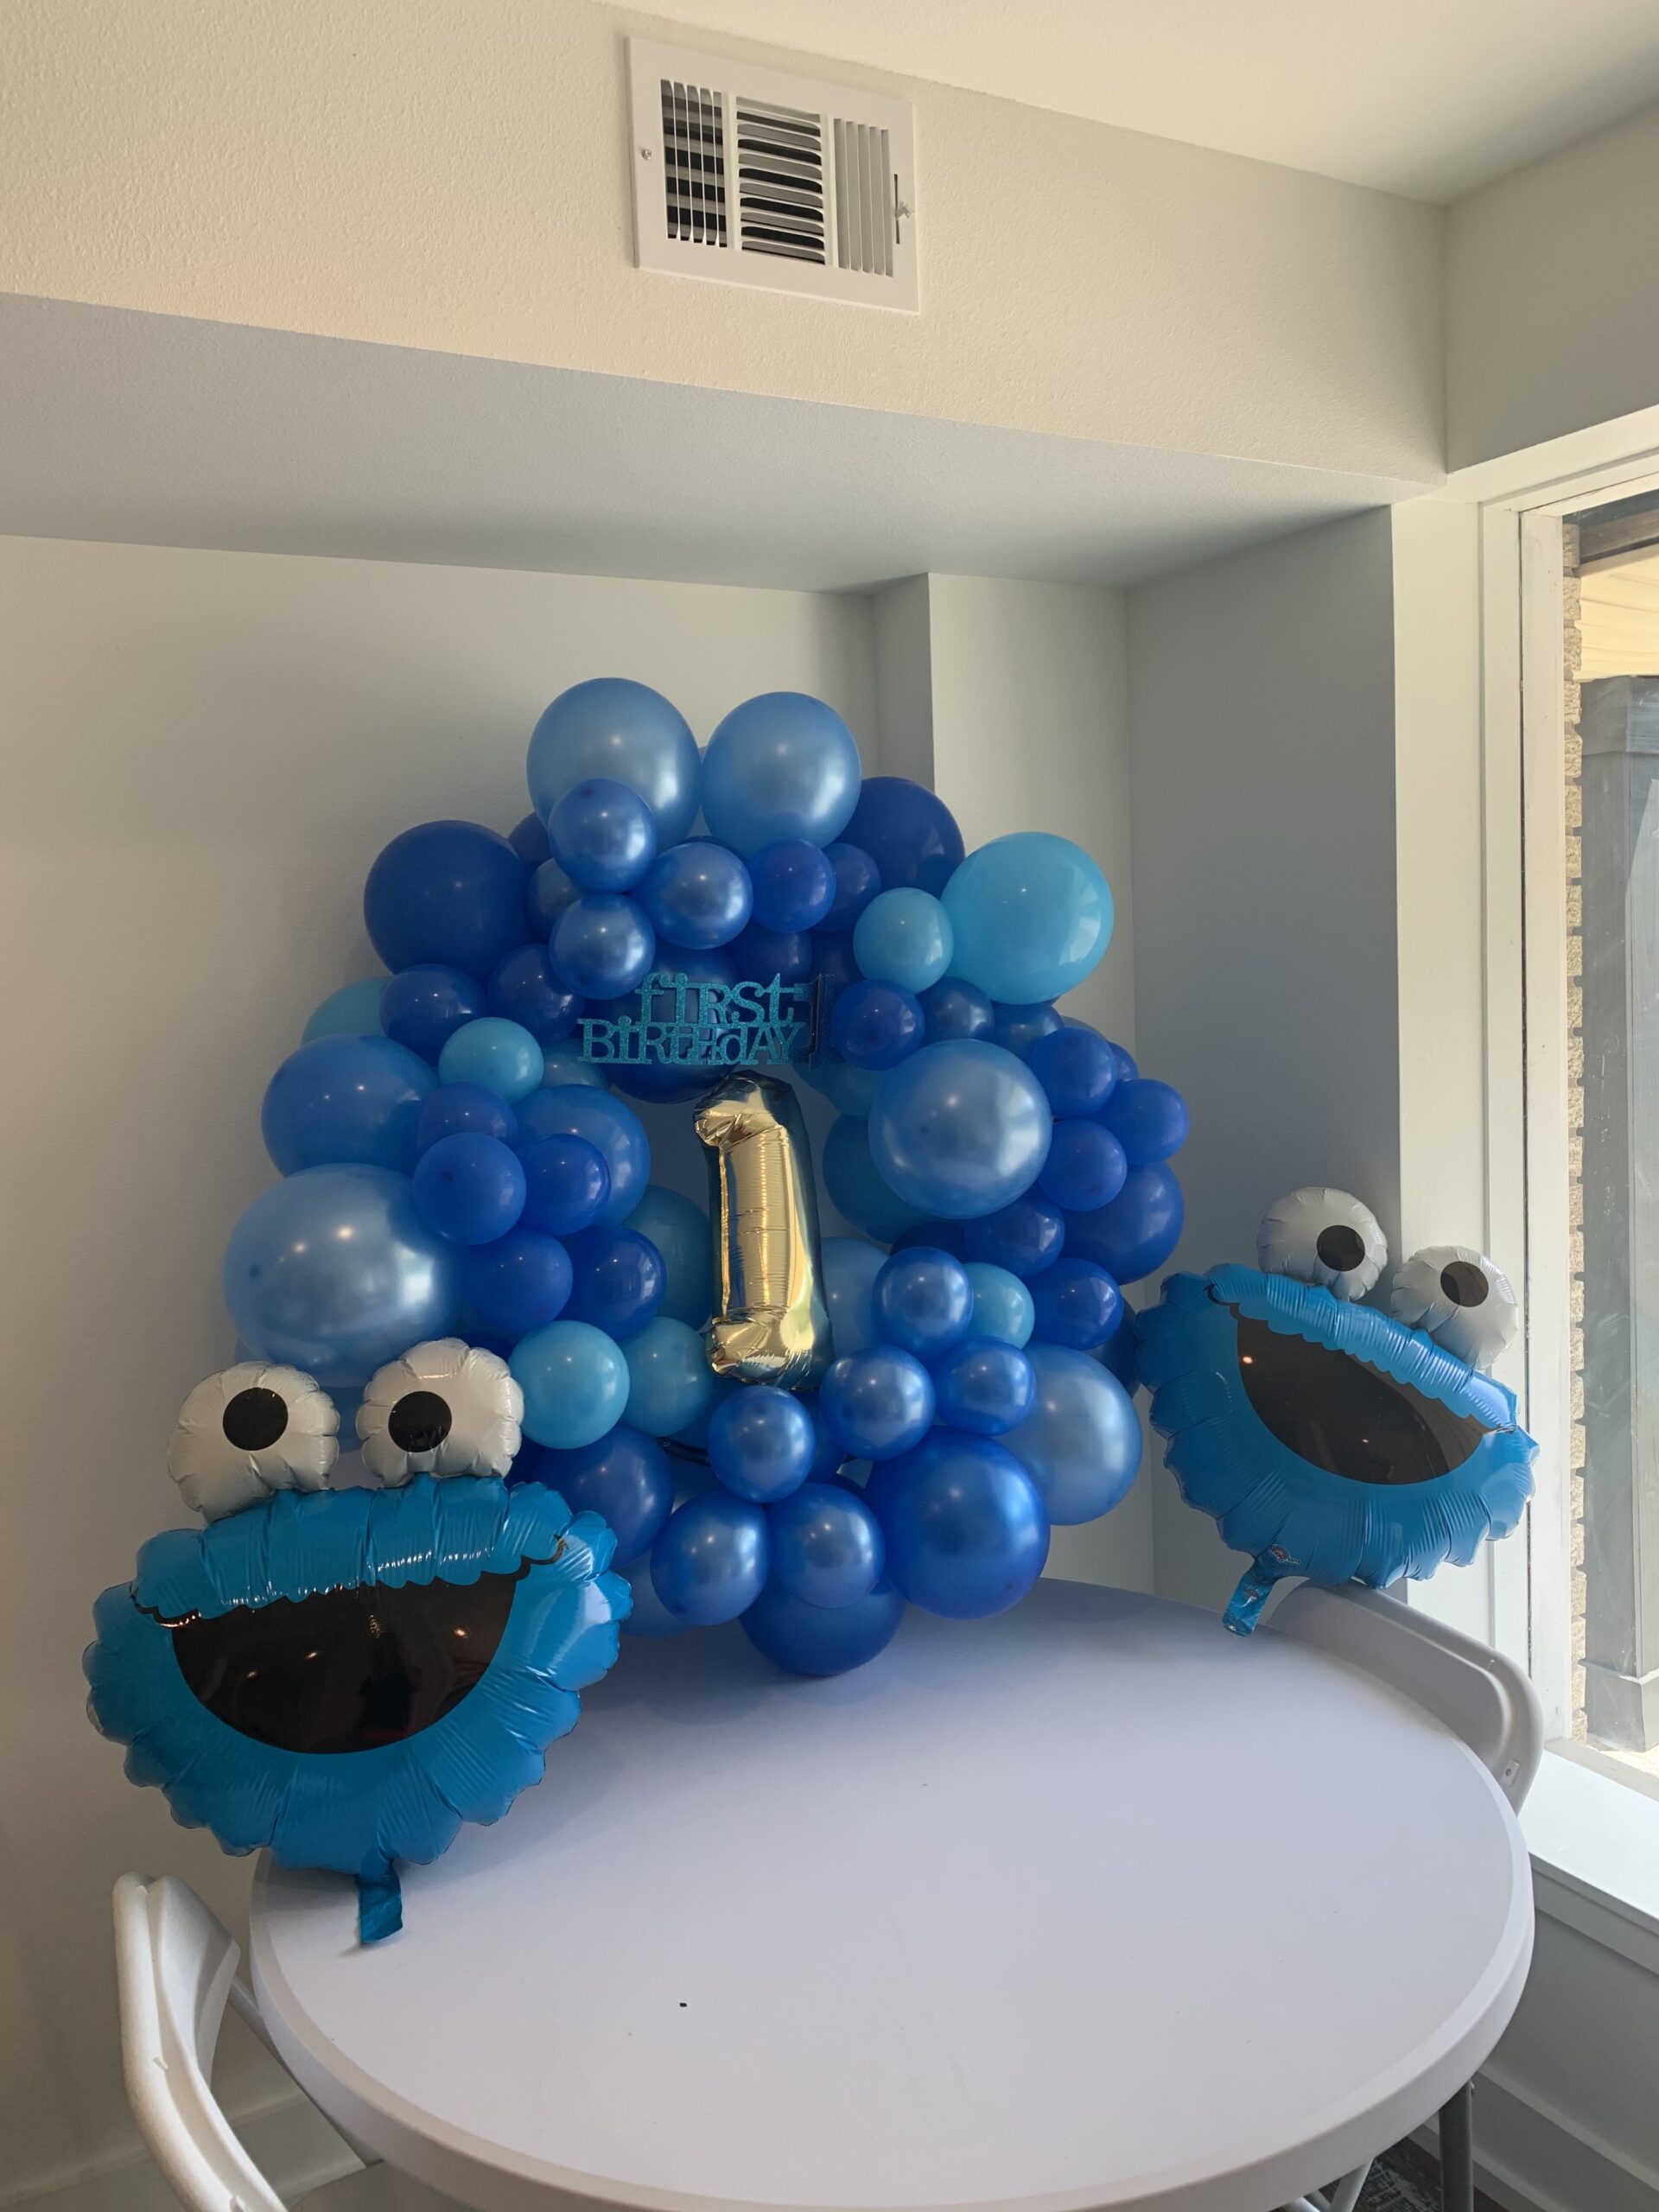 How to Create a Balloon Arch with Fishing Line